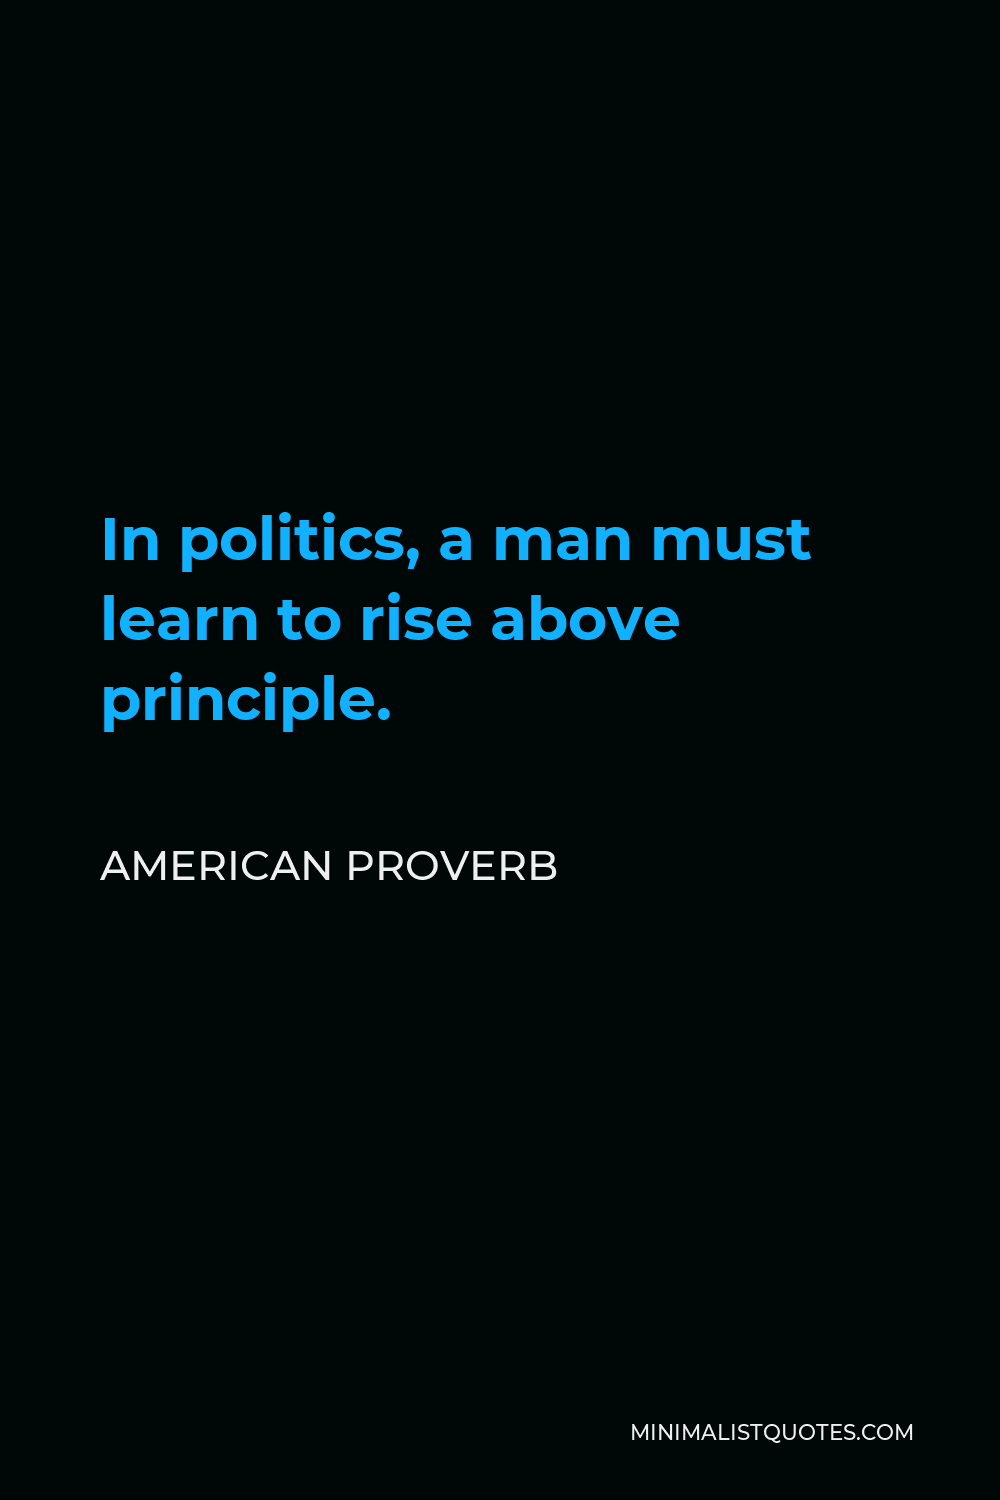 American Proverb Quote - In politics, a man must learn to rise above principle.